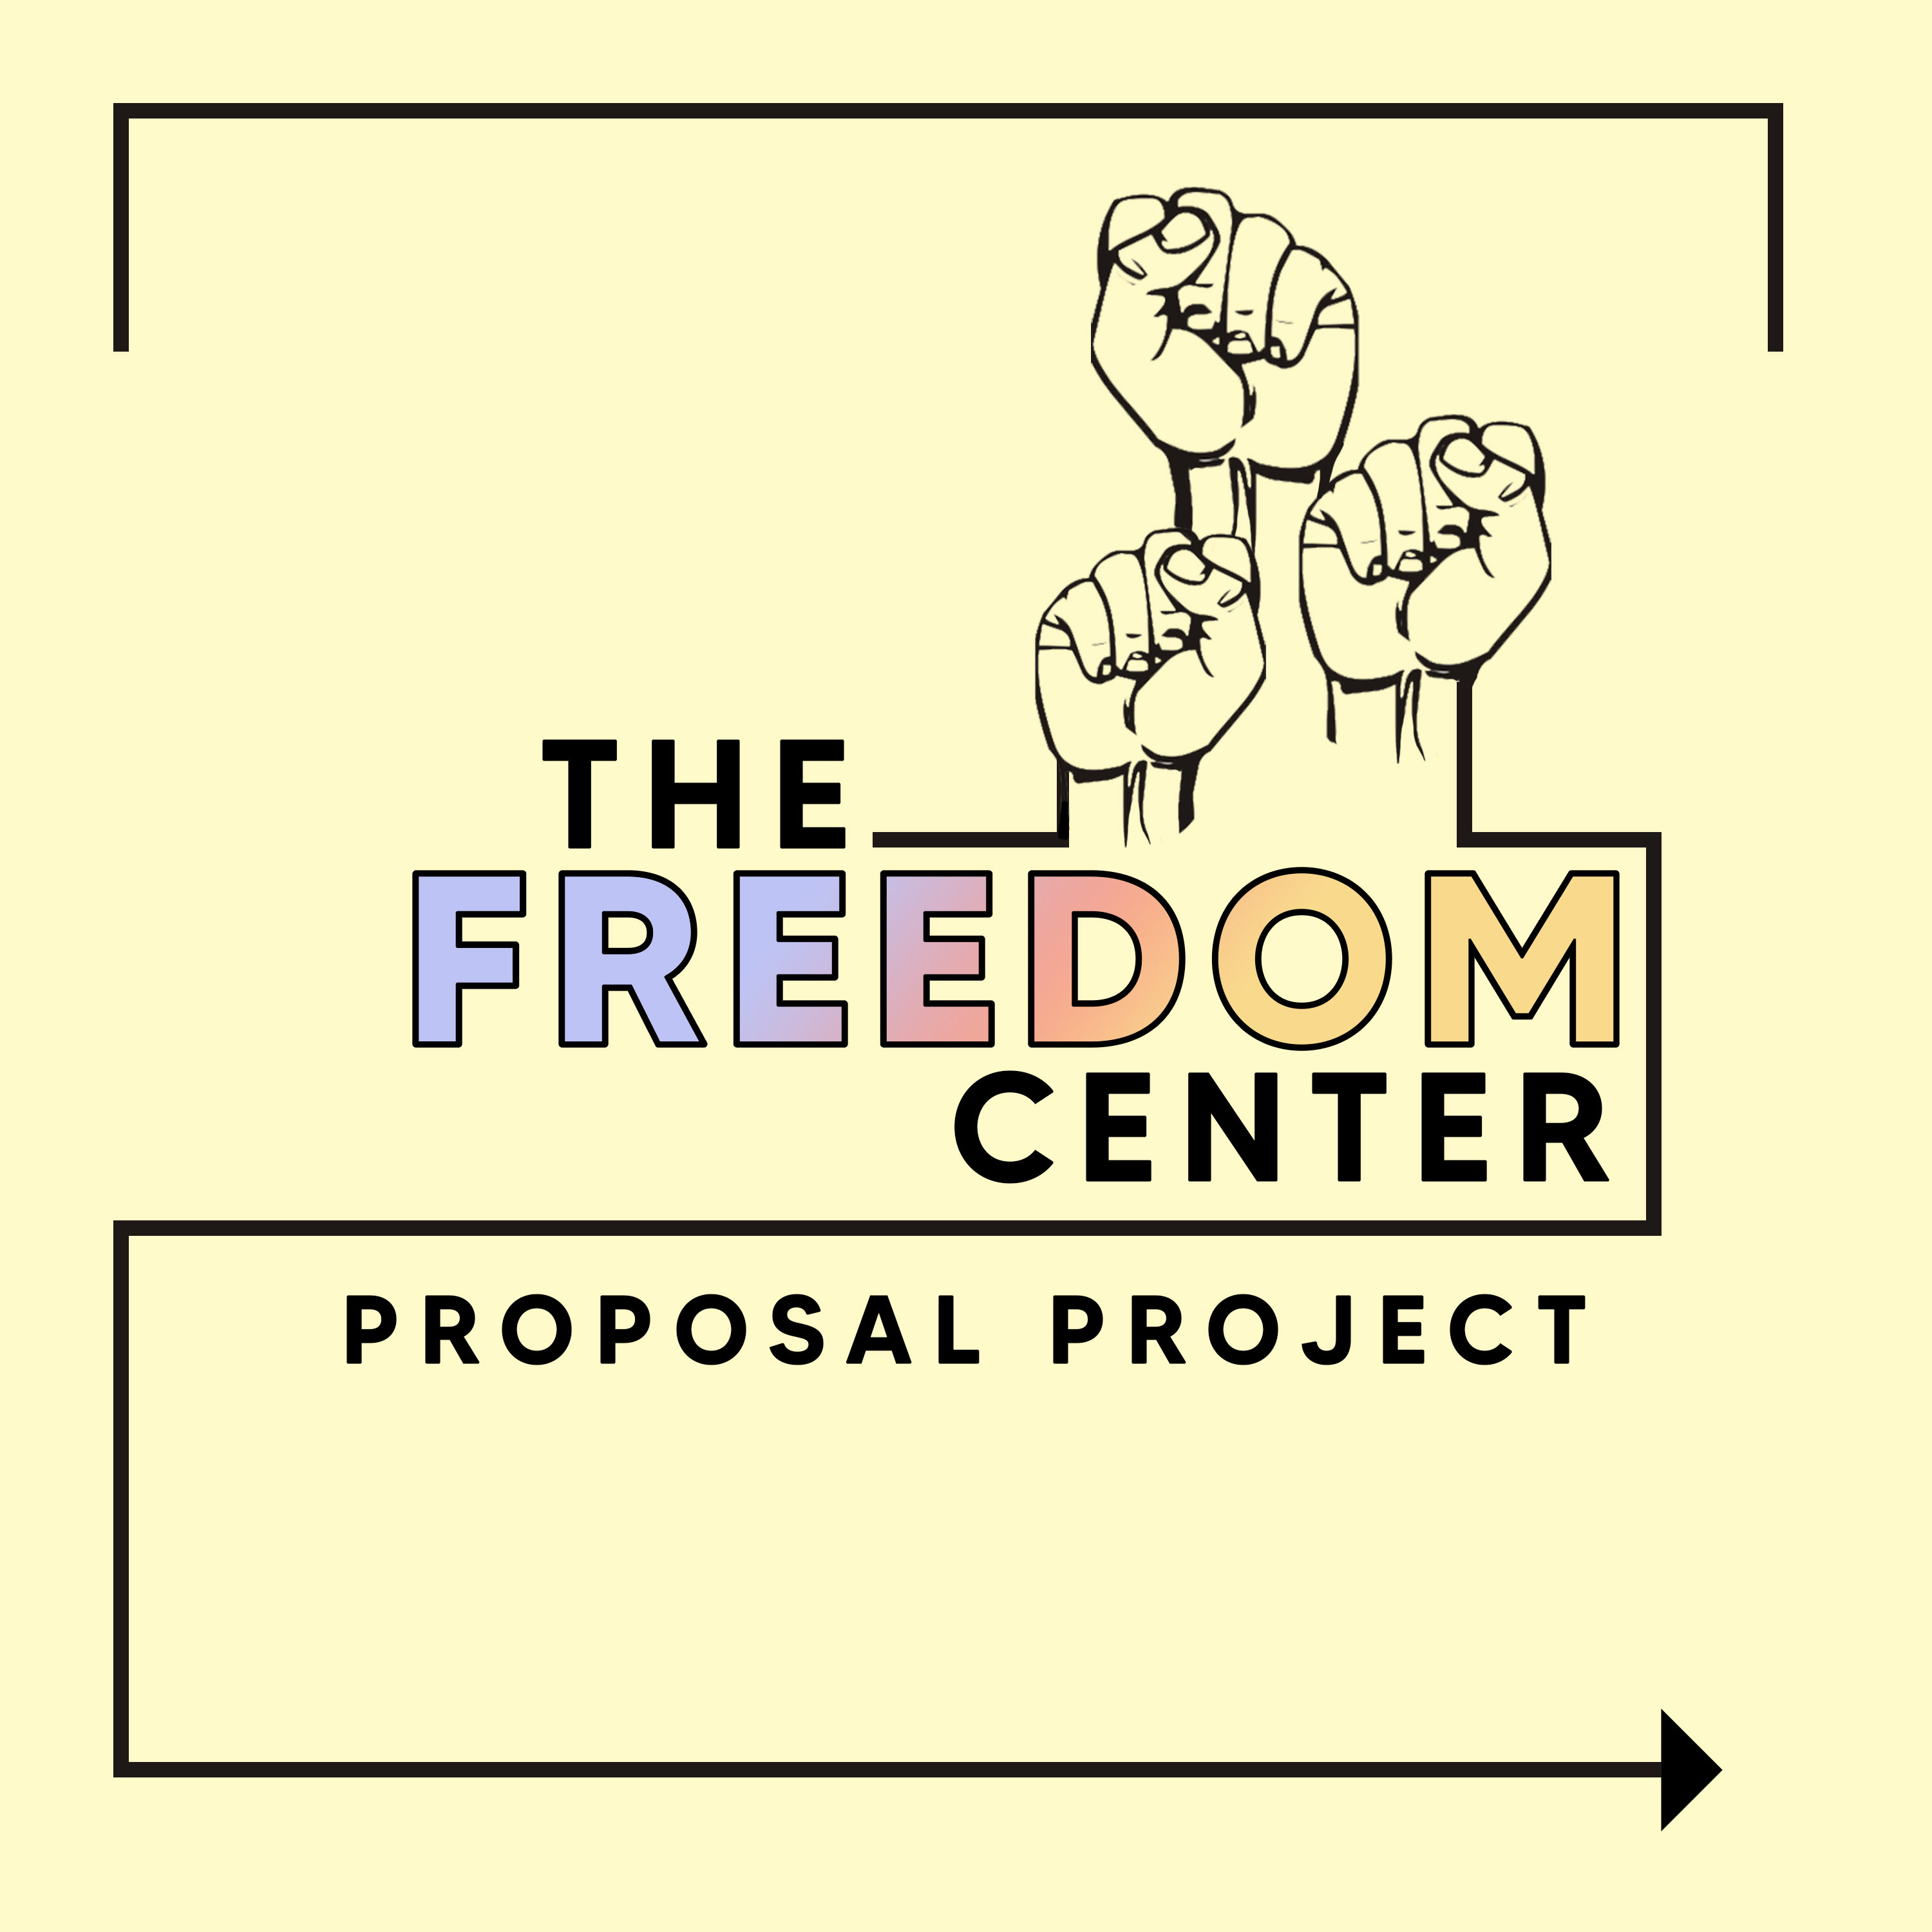 The fight for the Freedom Center continues